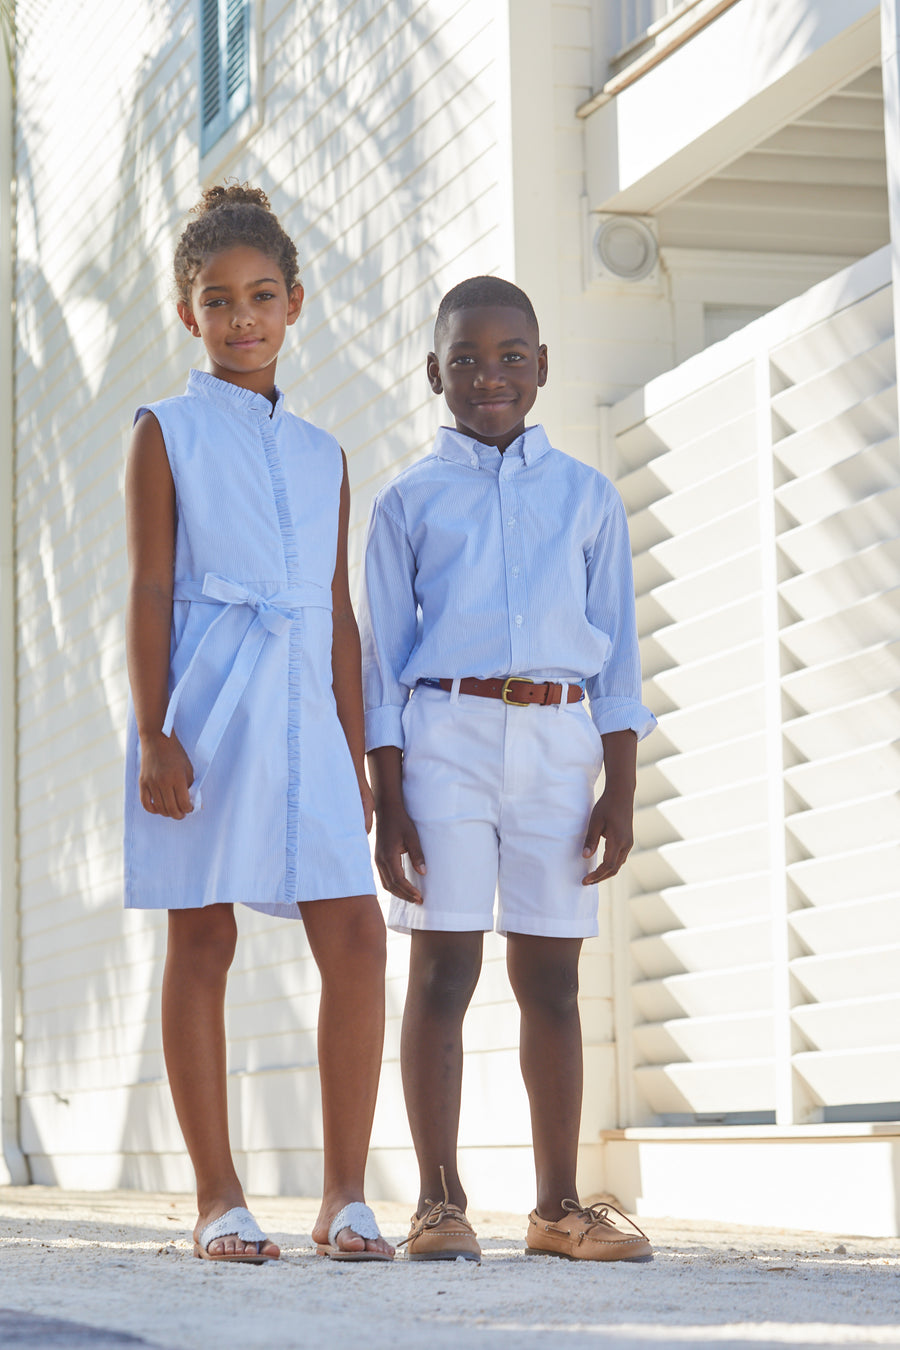 Little English traditional children's clothing, boy's classic light blue thin stripe button down for Spring